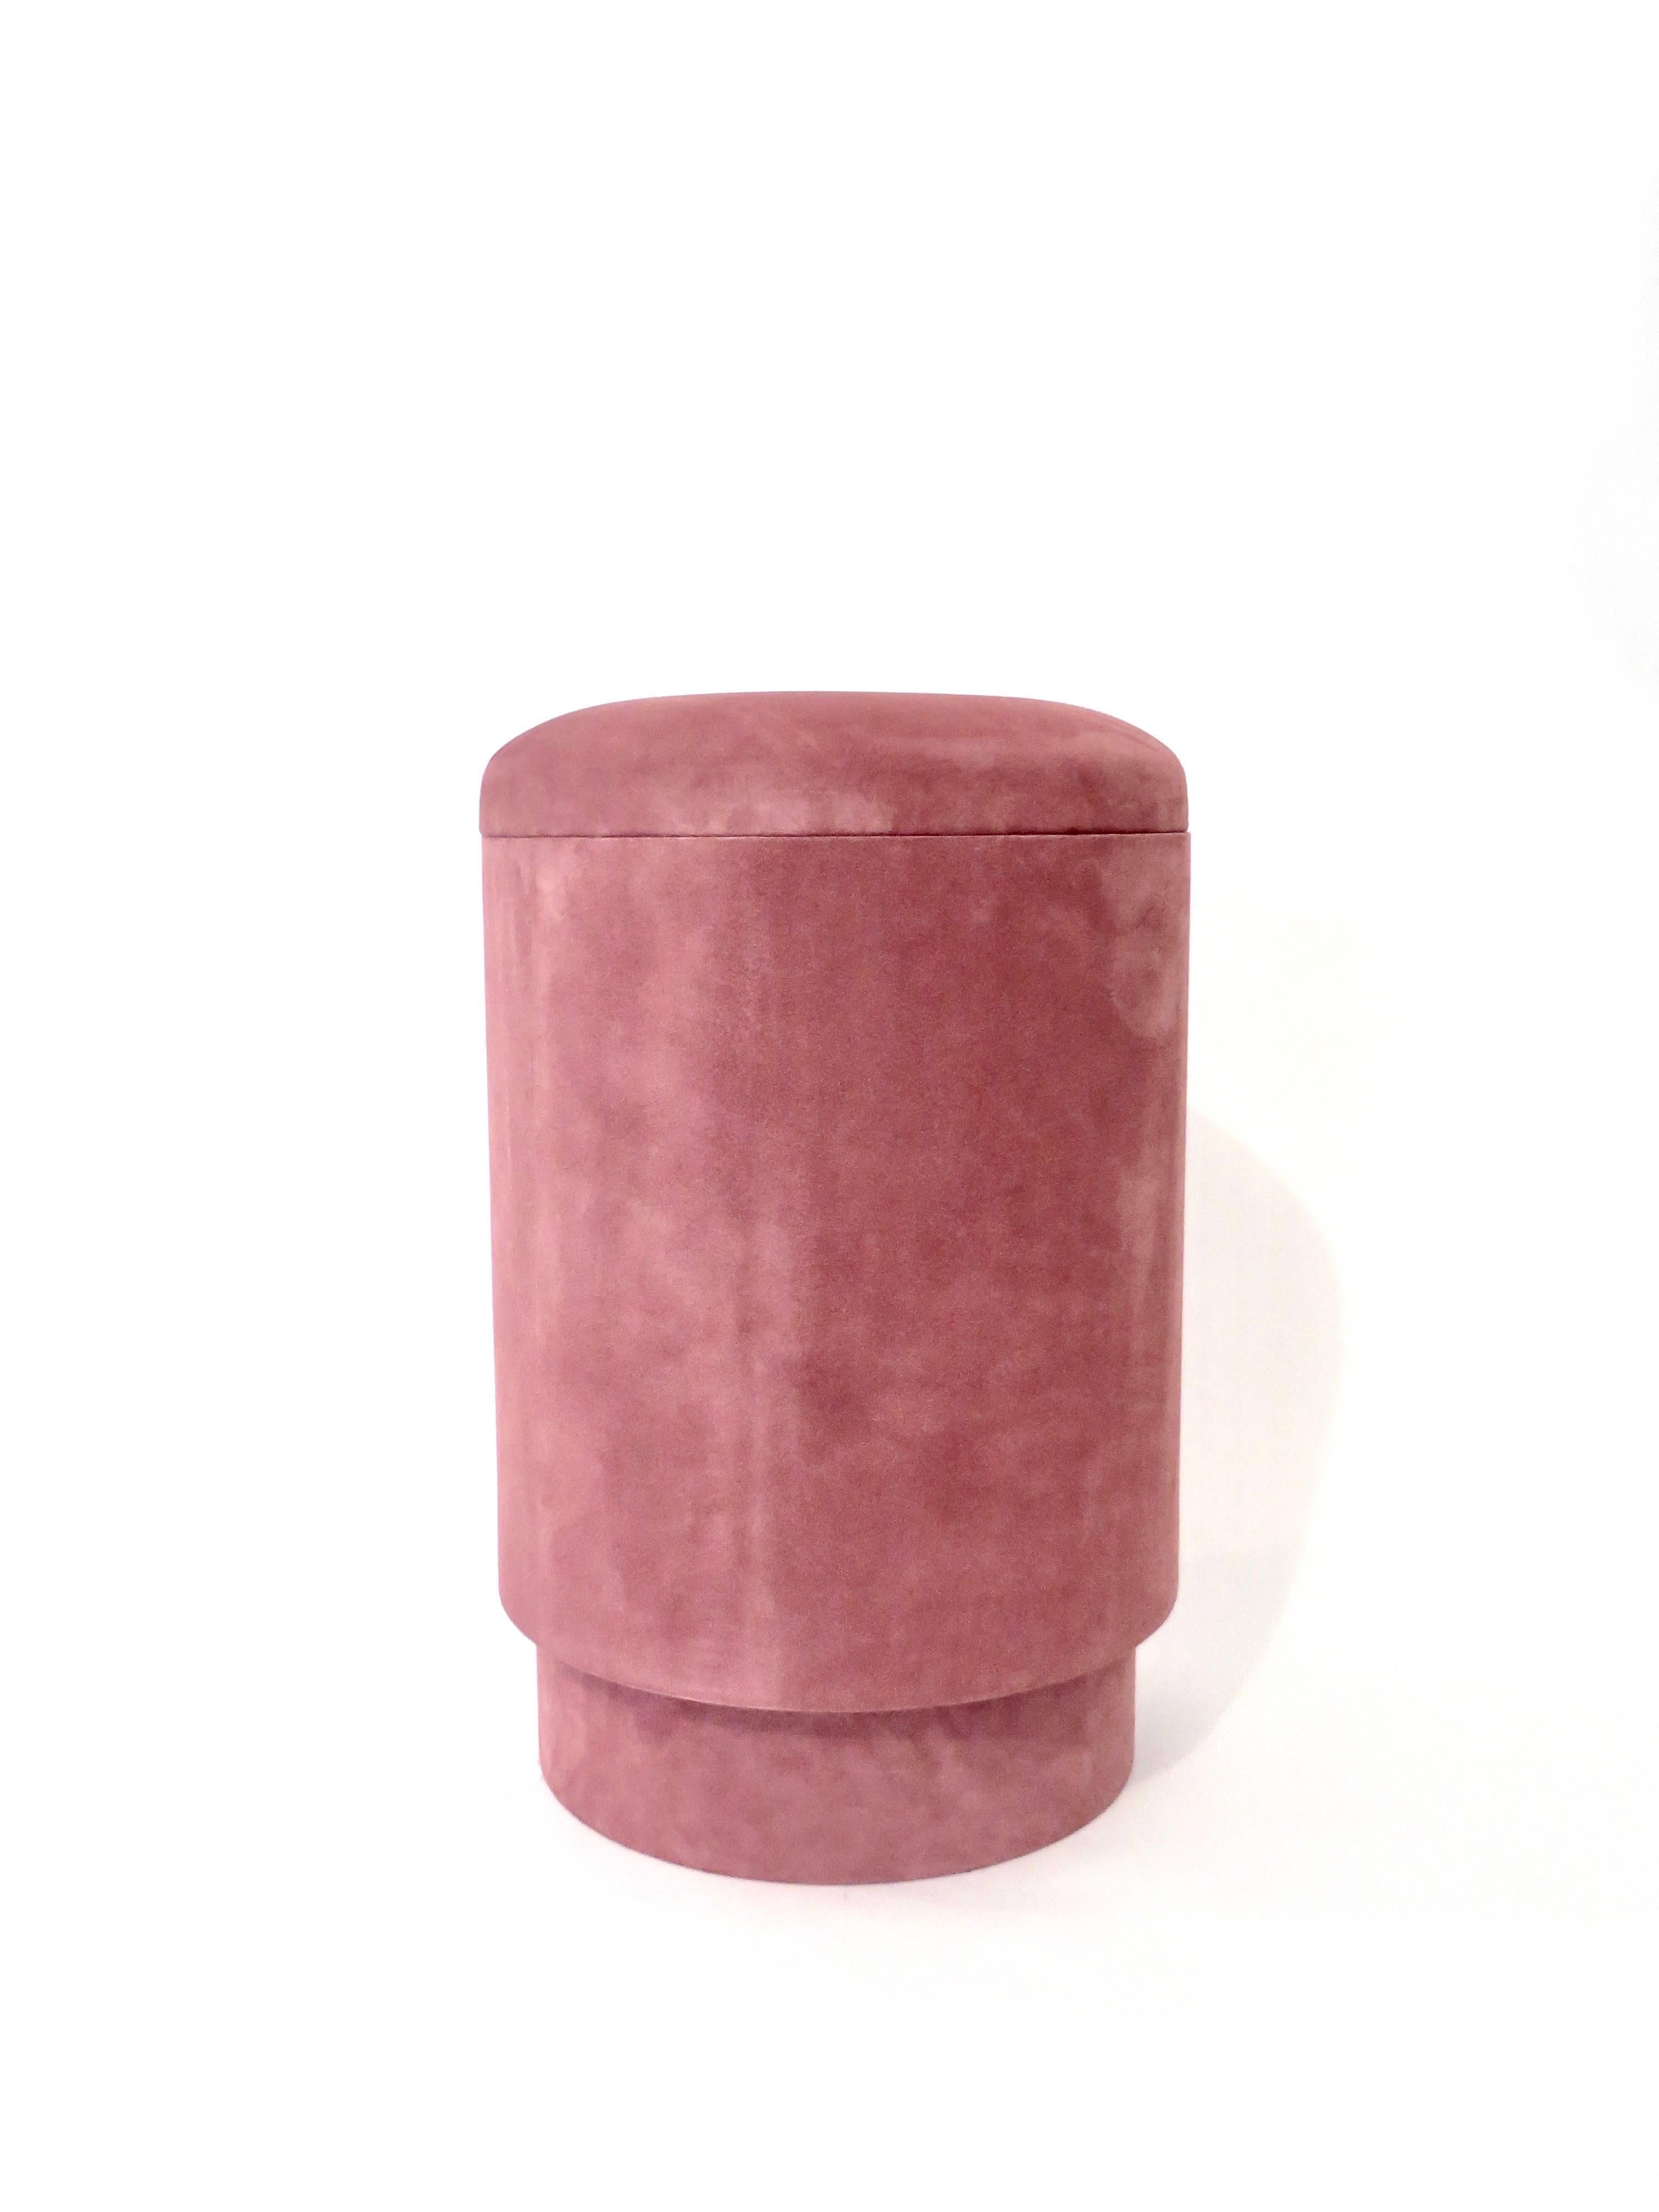 A Michael Verheyden pouf or tabou with storage covered in pink suede.
Pouf with storage space covered in the most beautiful suede in the color rose.
Covered in black suede inside.
Michael Verheyden is a Belgium based designer creating home